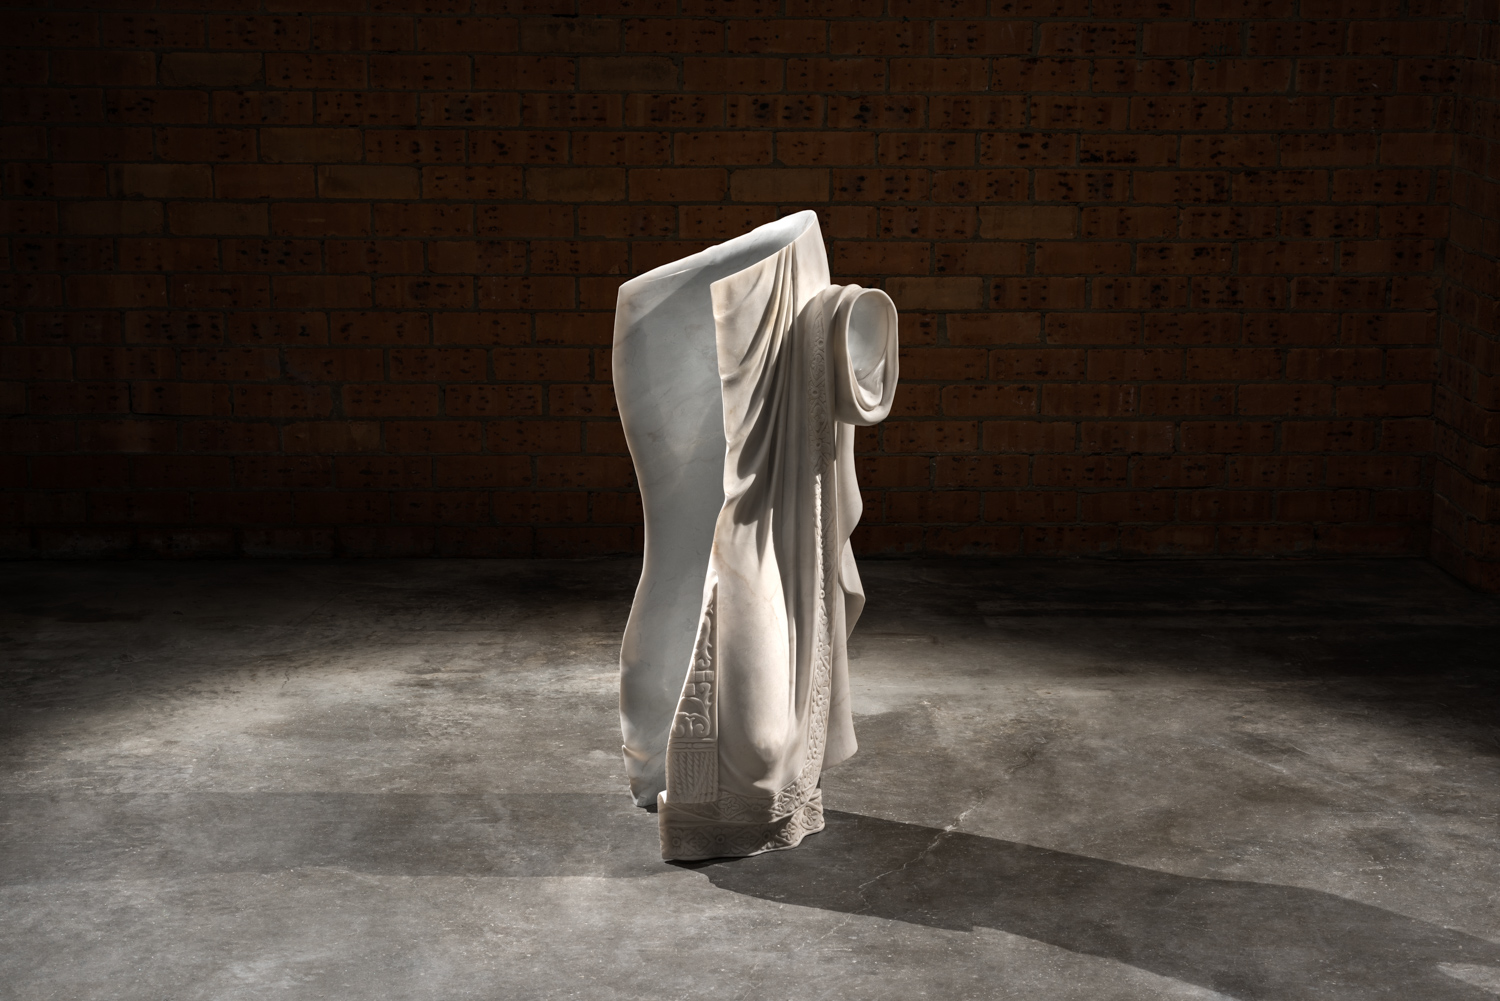    Robes of the effigy  &nbsp;2016 Imperial white, found object 